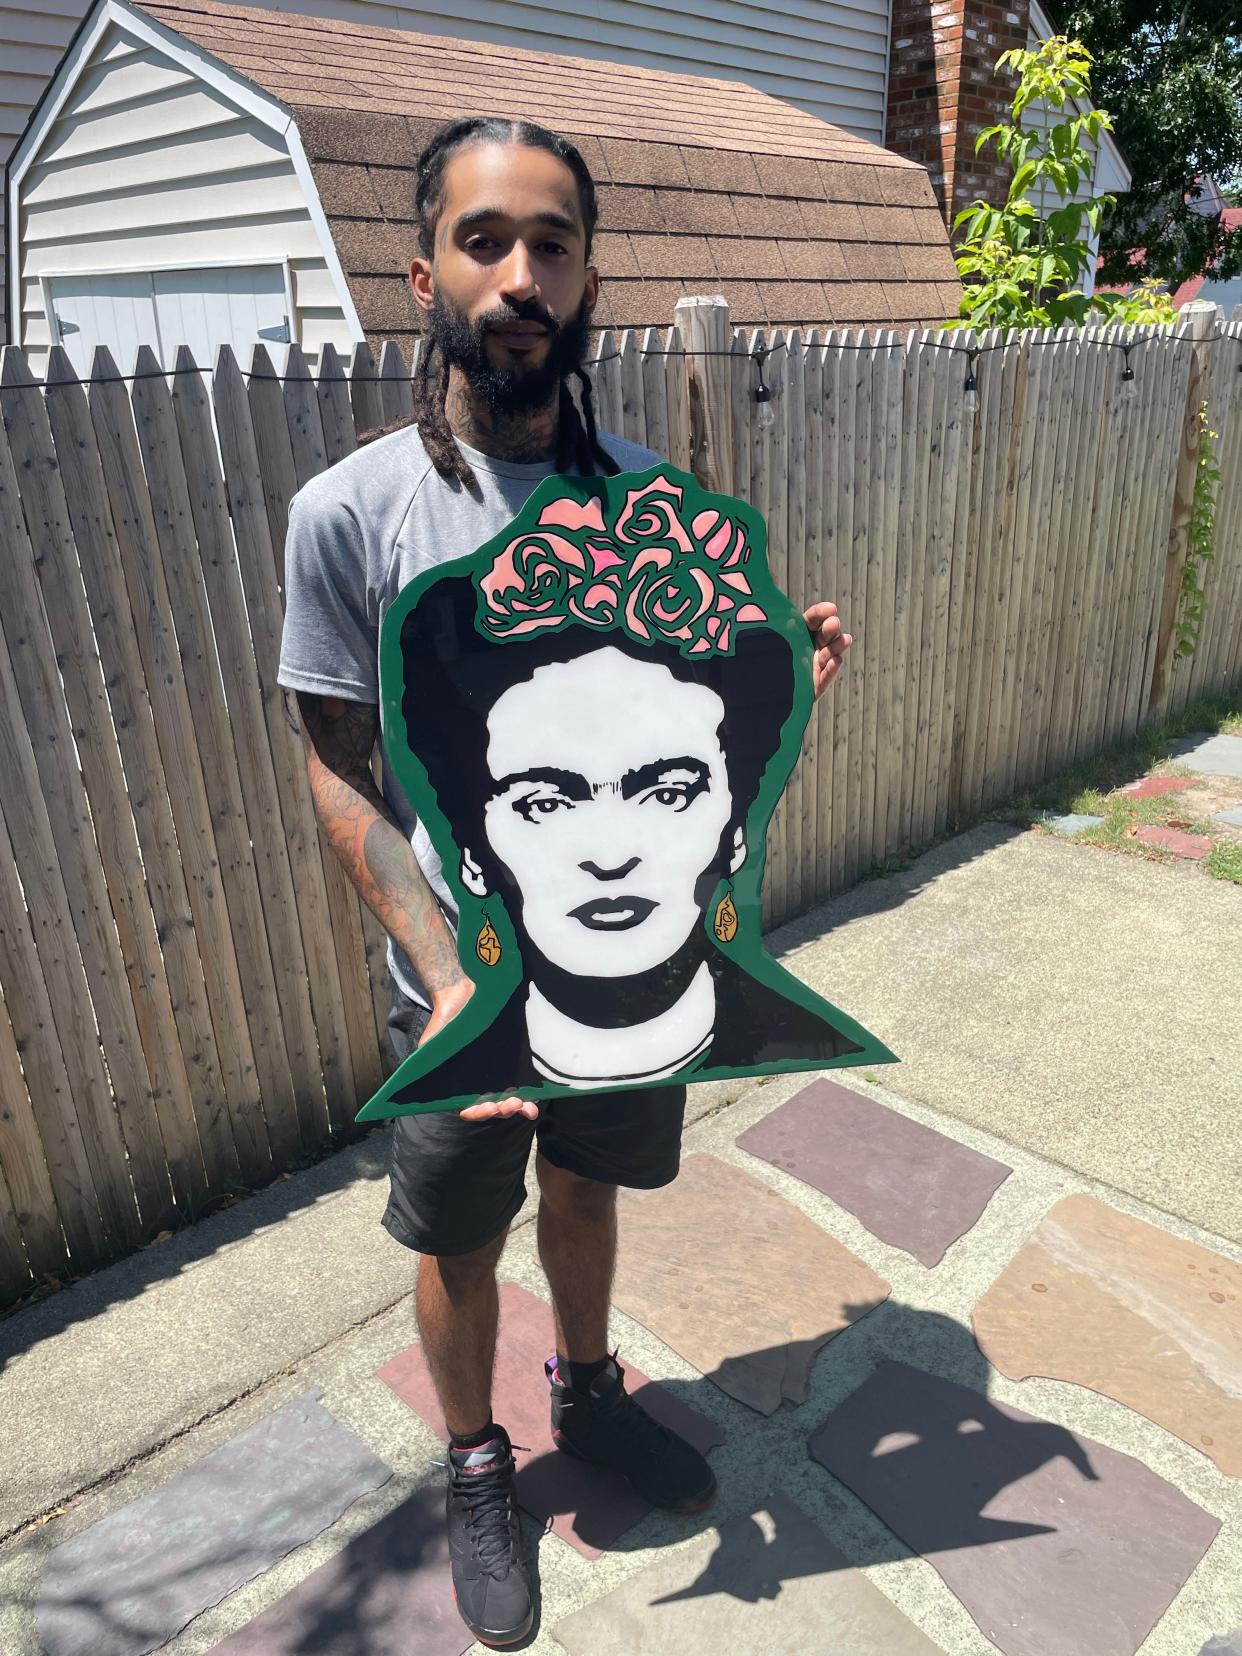 Mason Reverdes, 28, a self-taught artist with a piece he created with wood and epoxy resin. Reverdes started his art business QuarterKey.Us during the pandemic to elevate himself.